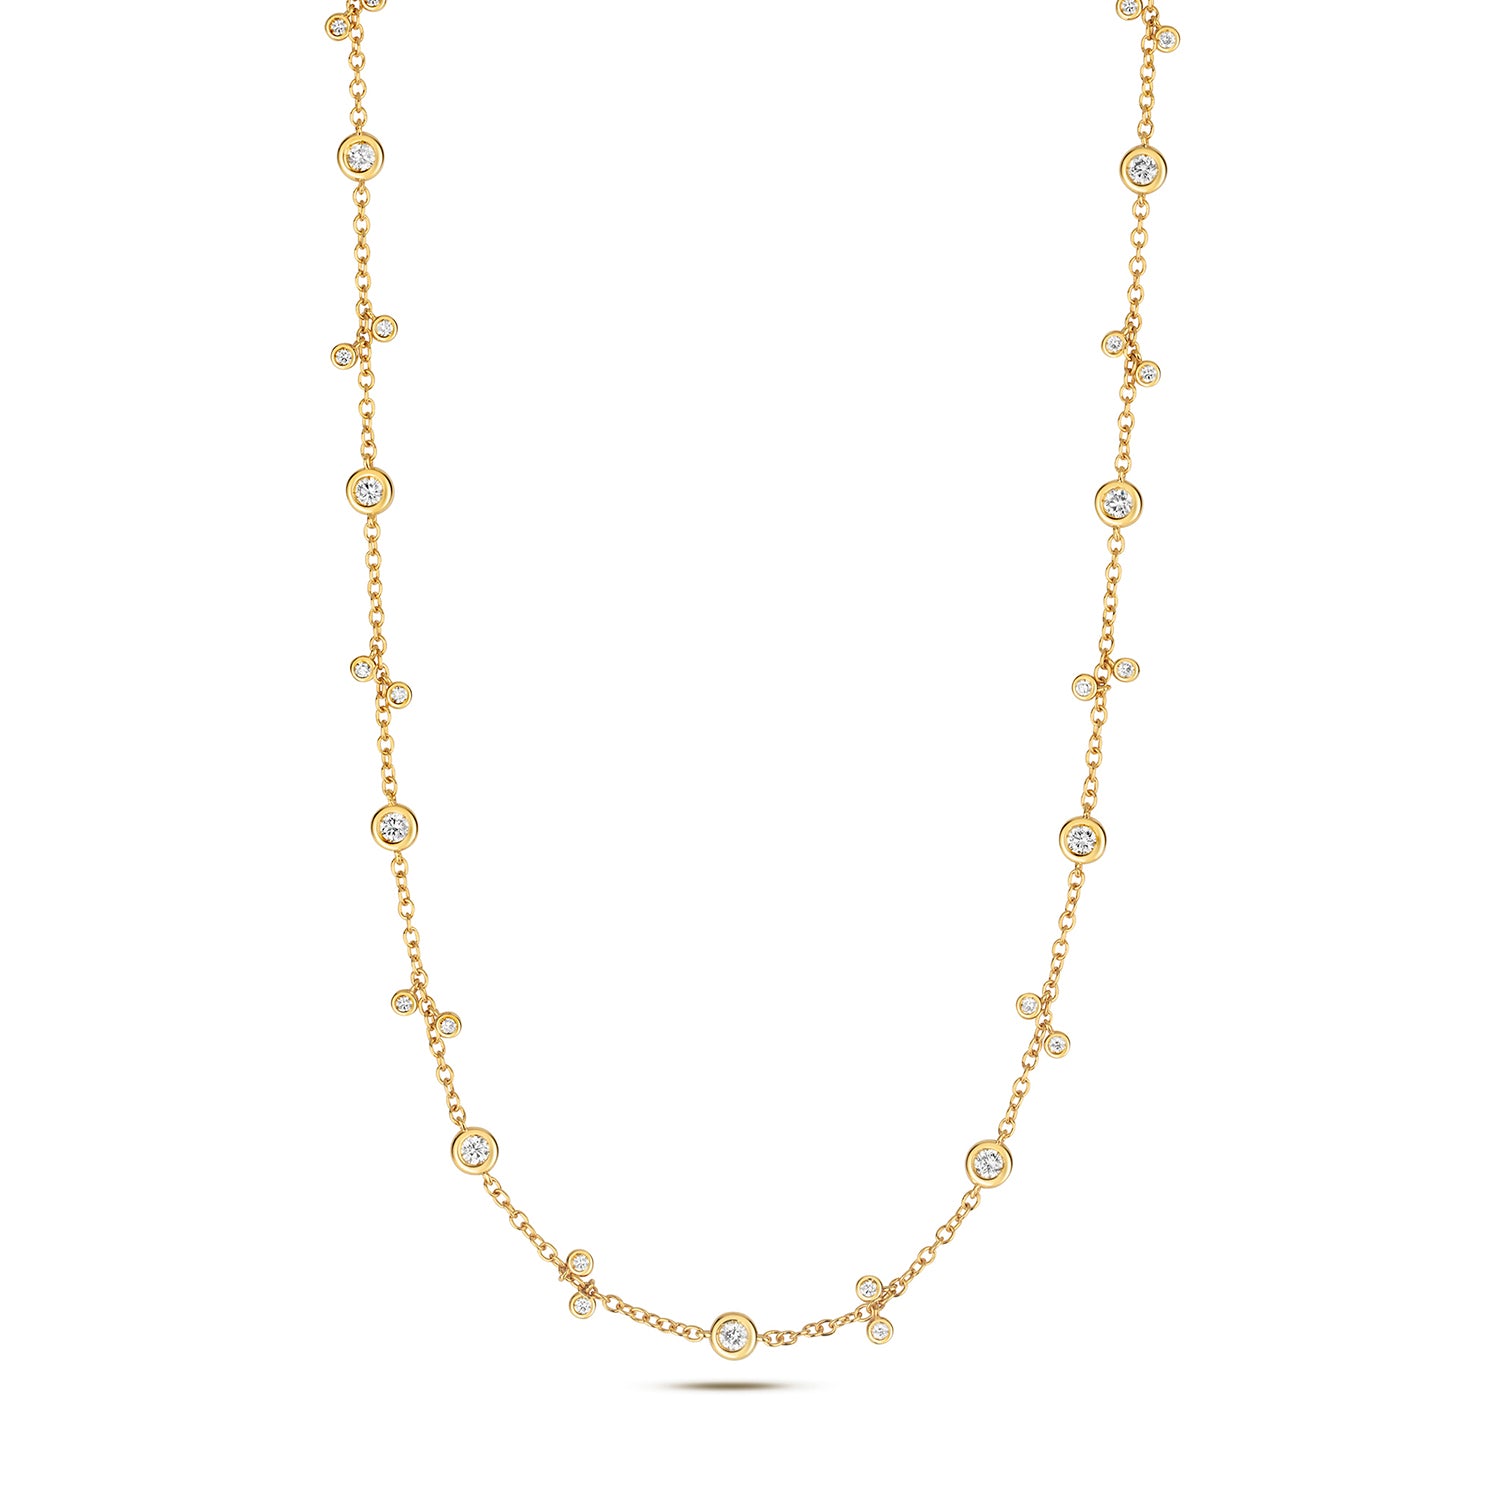 DIAMOND NECKLACE IN 18CT GOLD